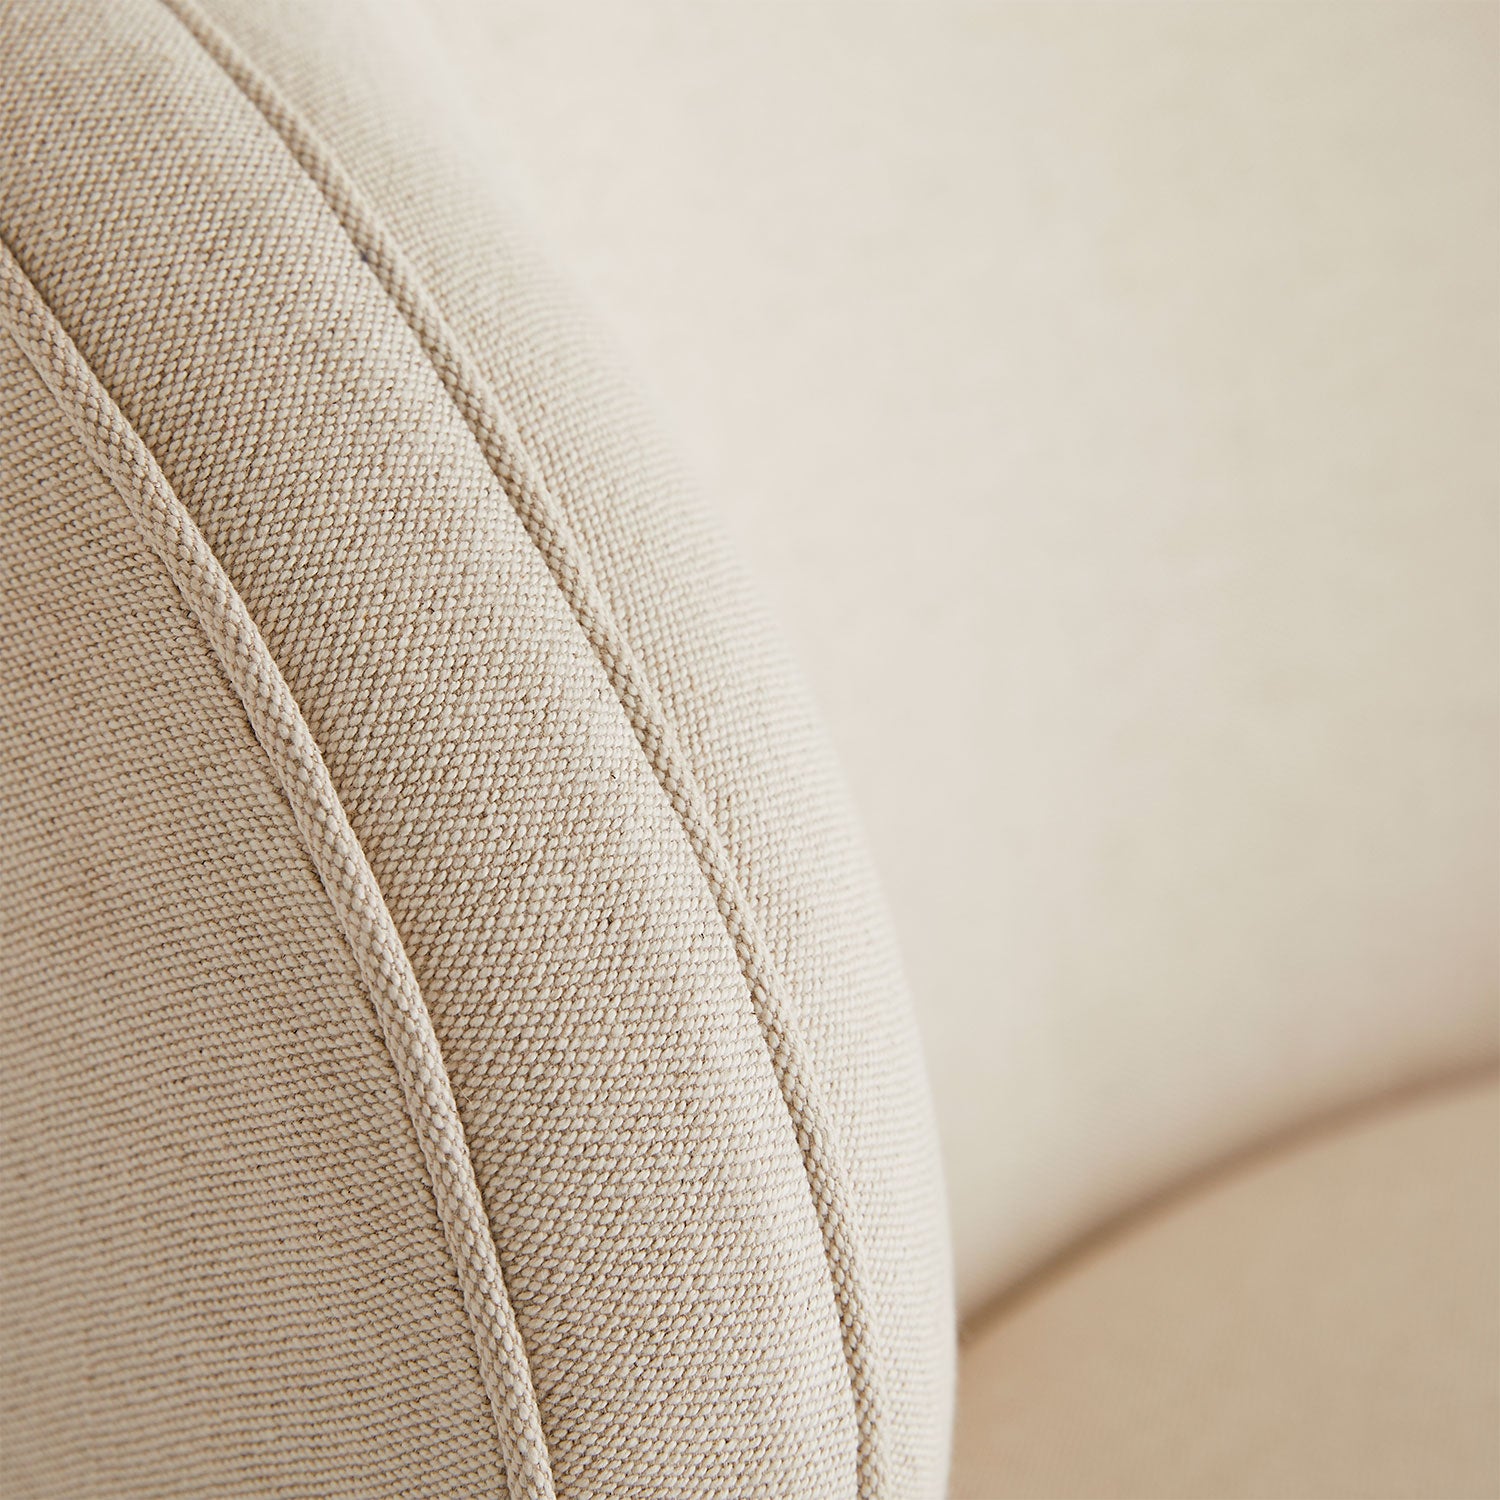 Close-up of textured beige fabric with prominent weave pattern and seam detail.